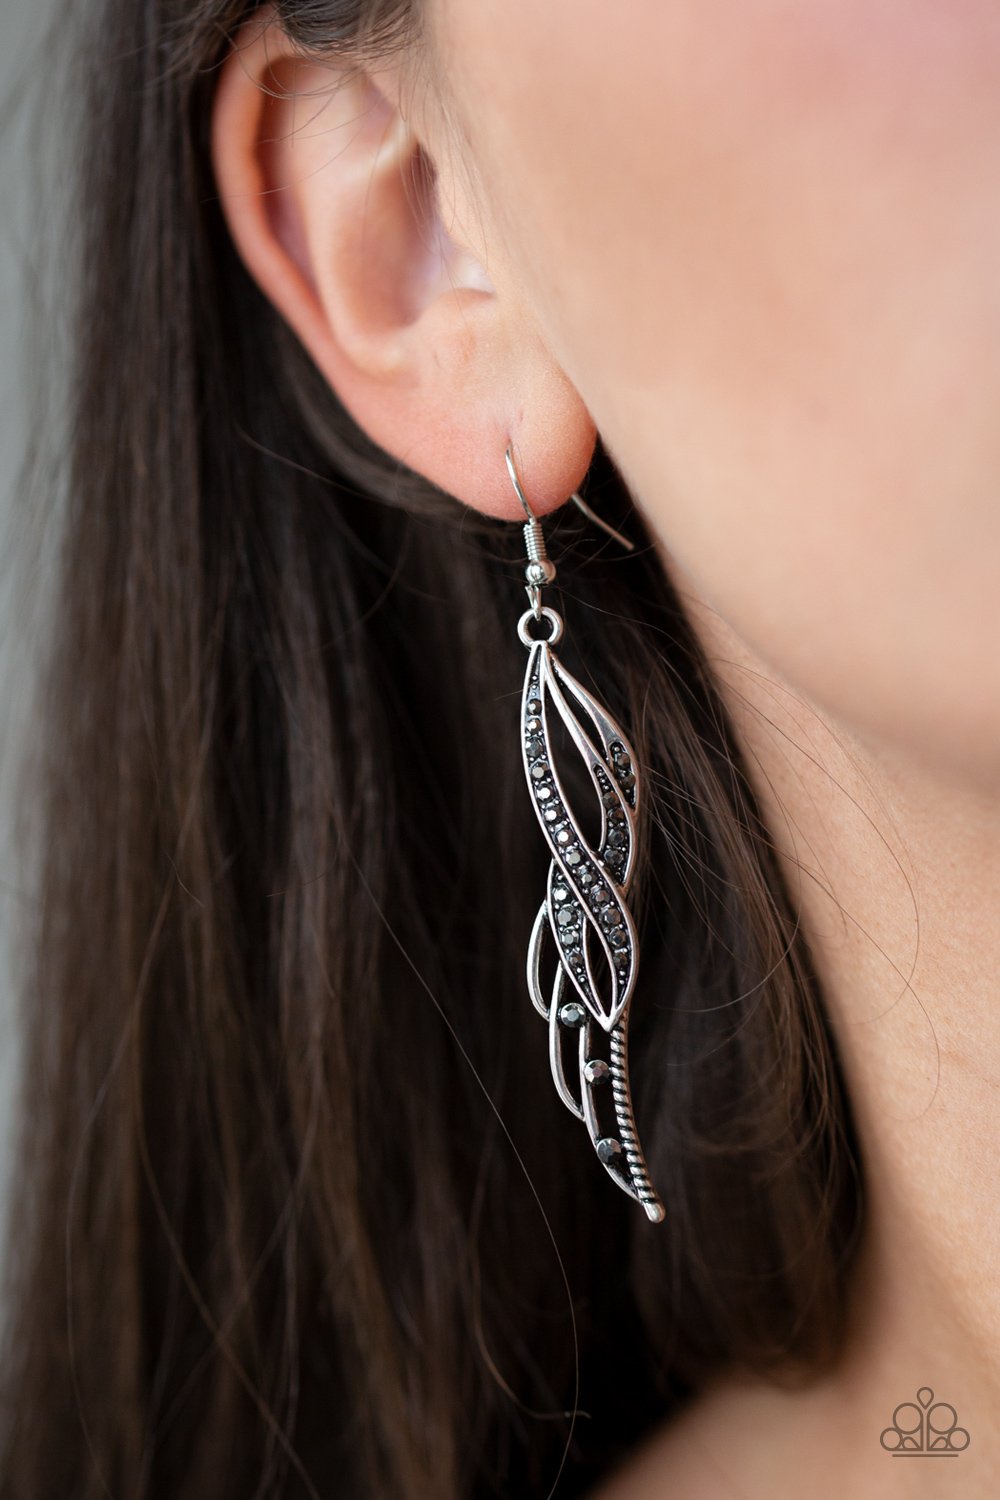 Let Down Your Wings-silver-Paparazzi earrings